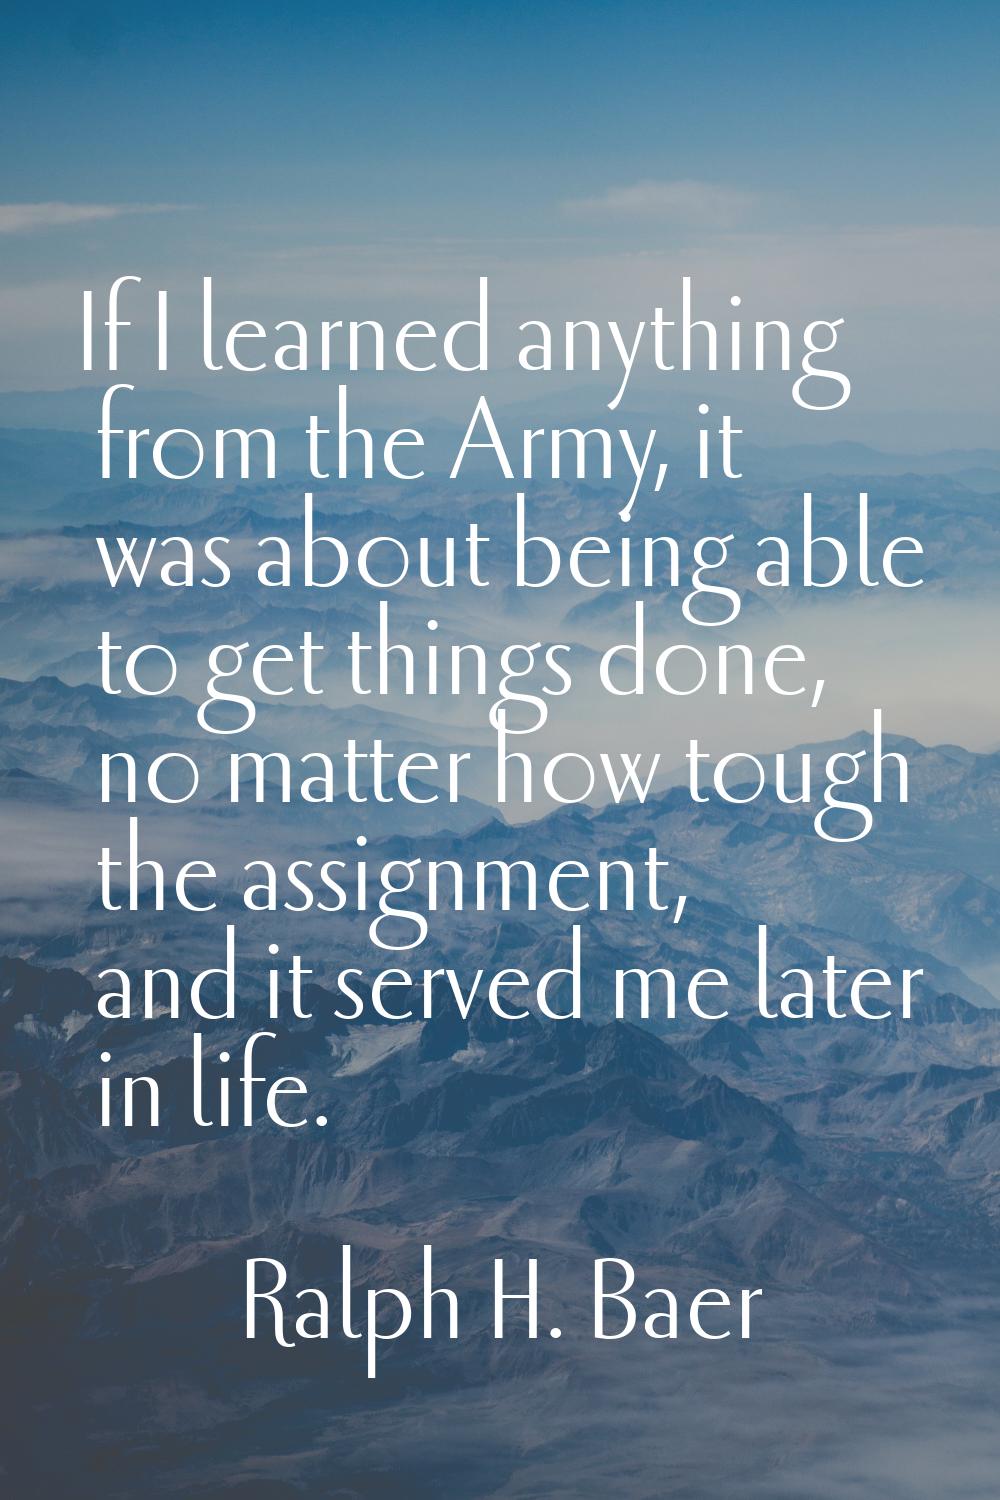 If I learned anything from the Army, it was about being able to get things done, no matter how toug